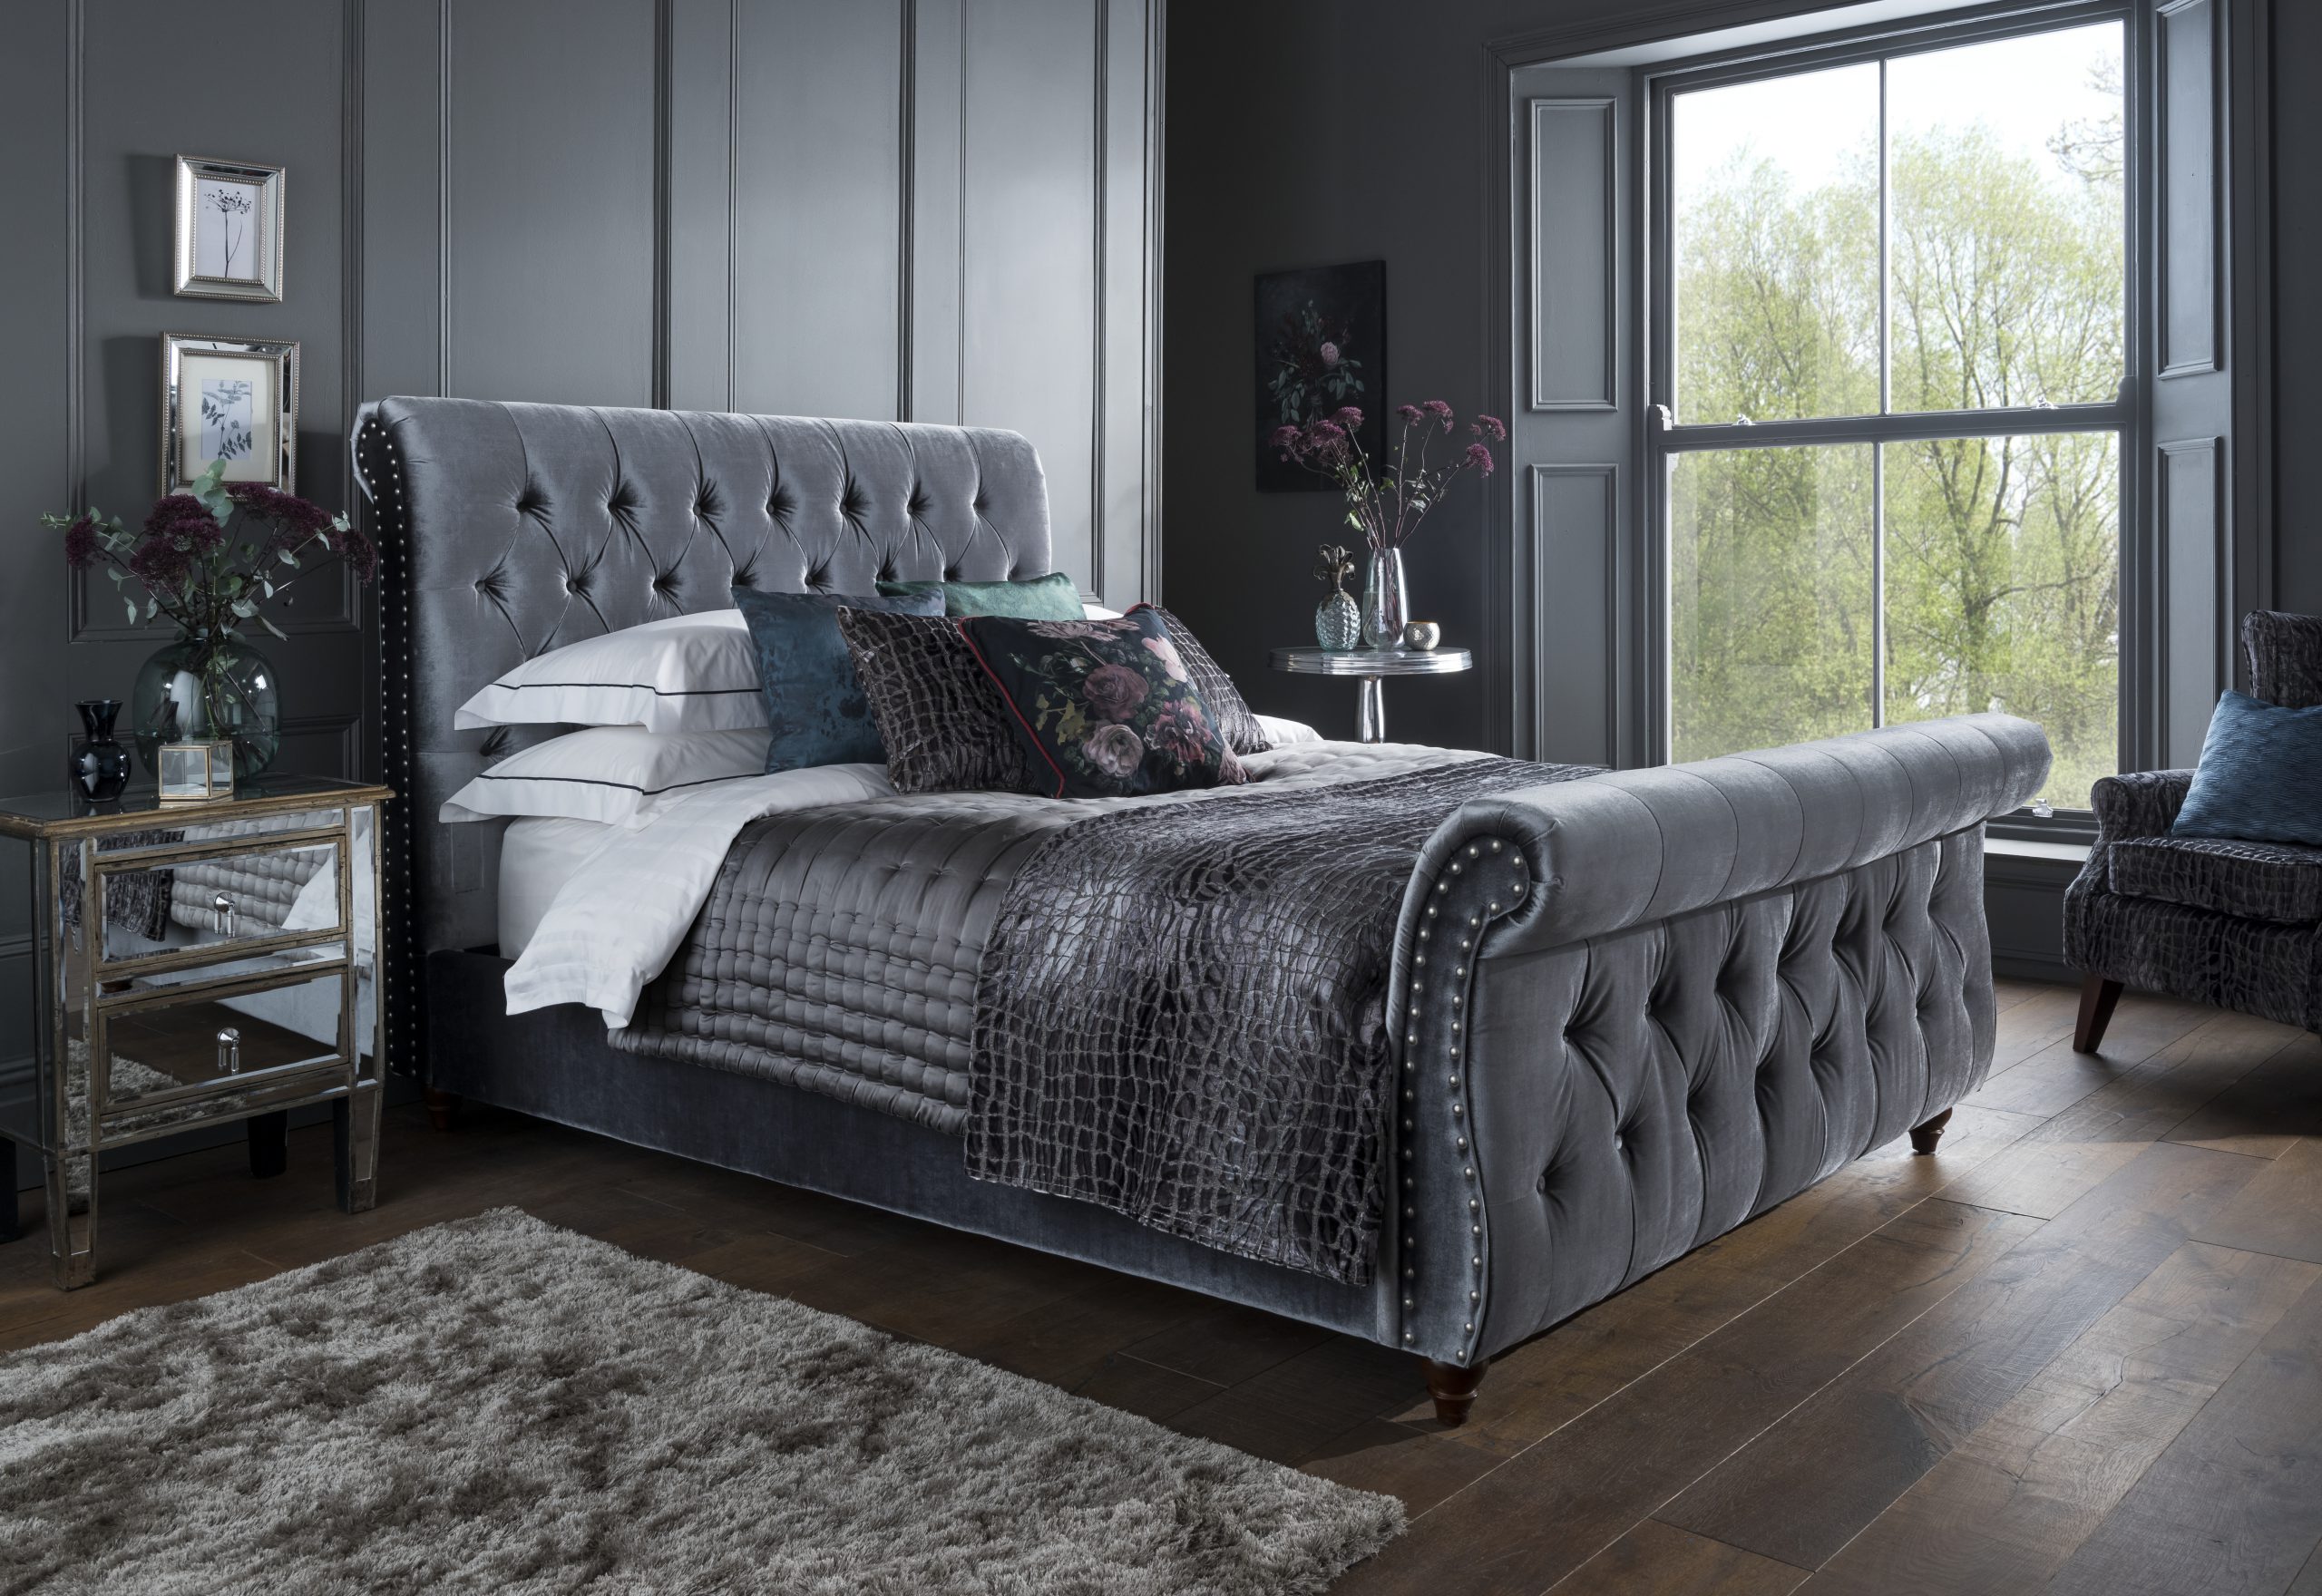 Maldon Titanium Super King Size Bed, King Size Bed Specials